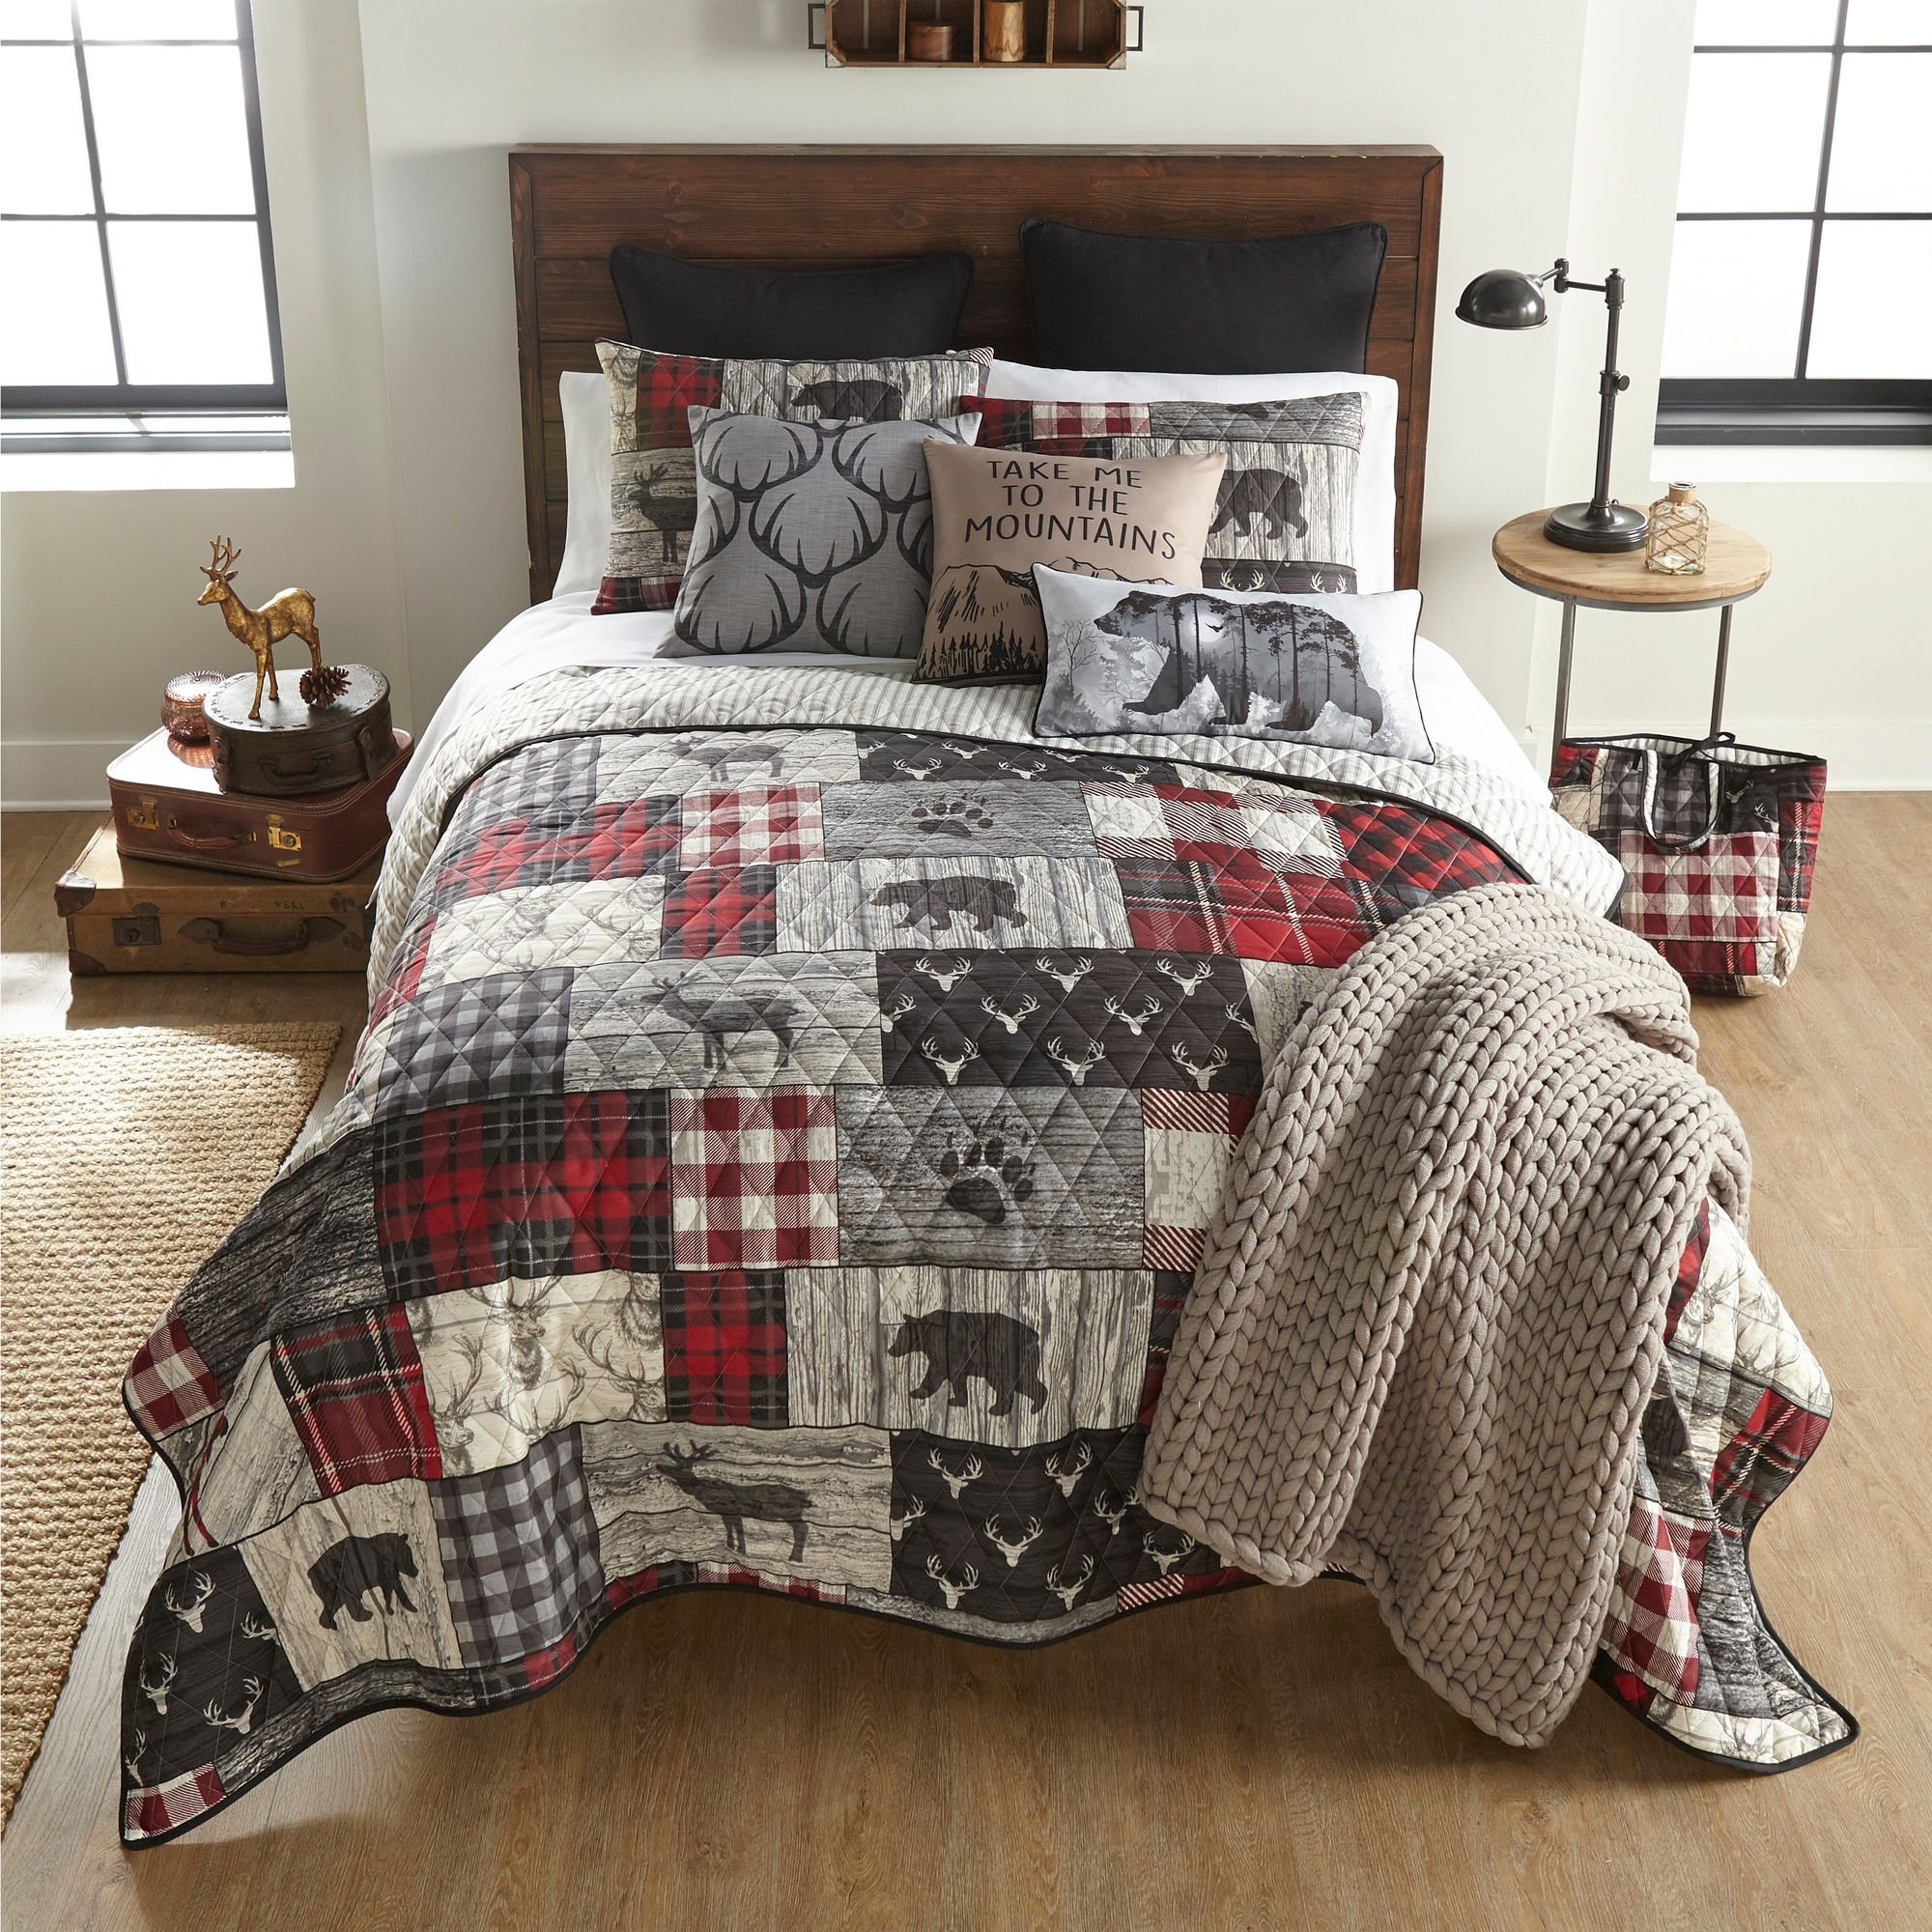 https://ak1.ostkcdn.com/images/products/is/images/direct/6542ac6bd976cb5e8768caee78cc4b7dbc4c396f/Your-Lifestyle-by-Donna-Sharp-Timber-3-PC-Quilt-Set.jpg